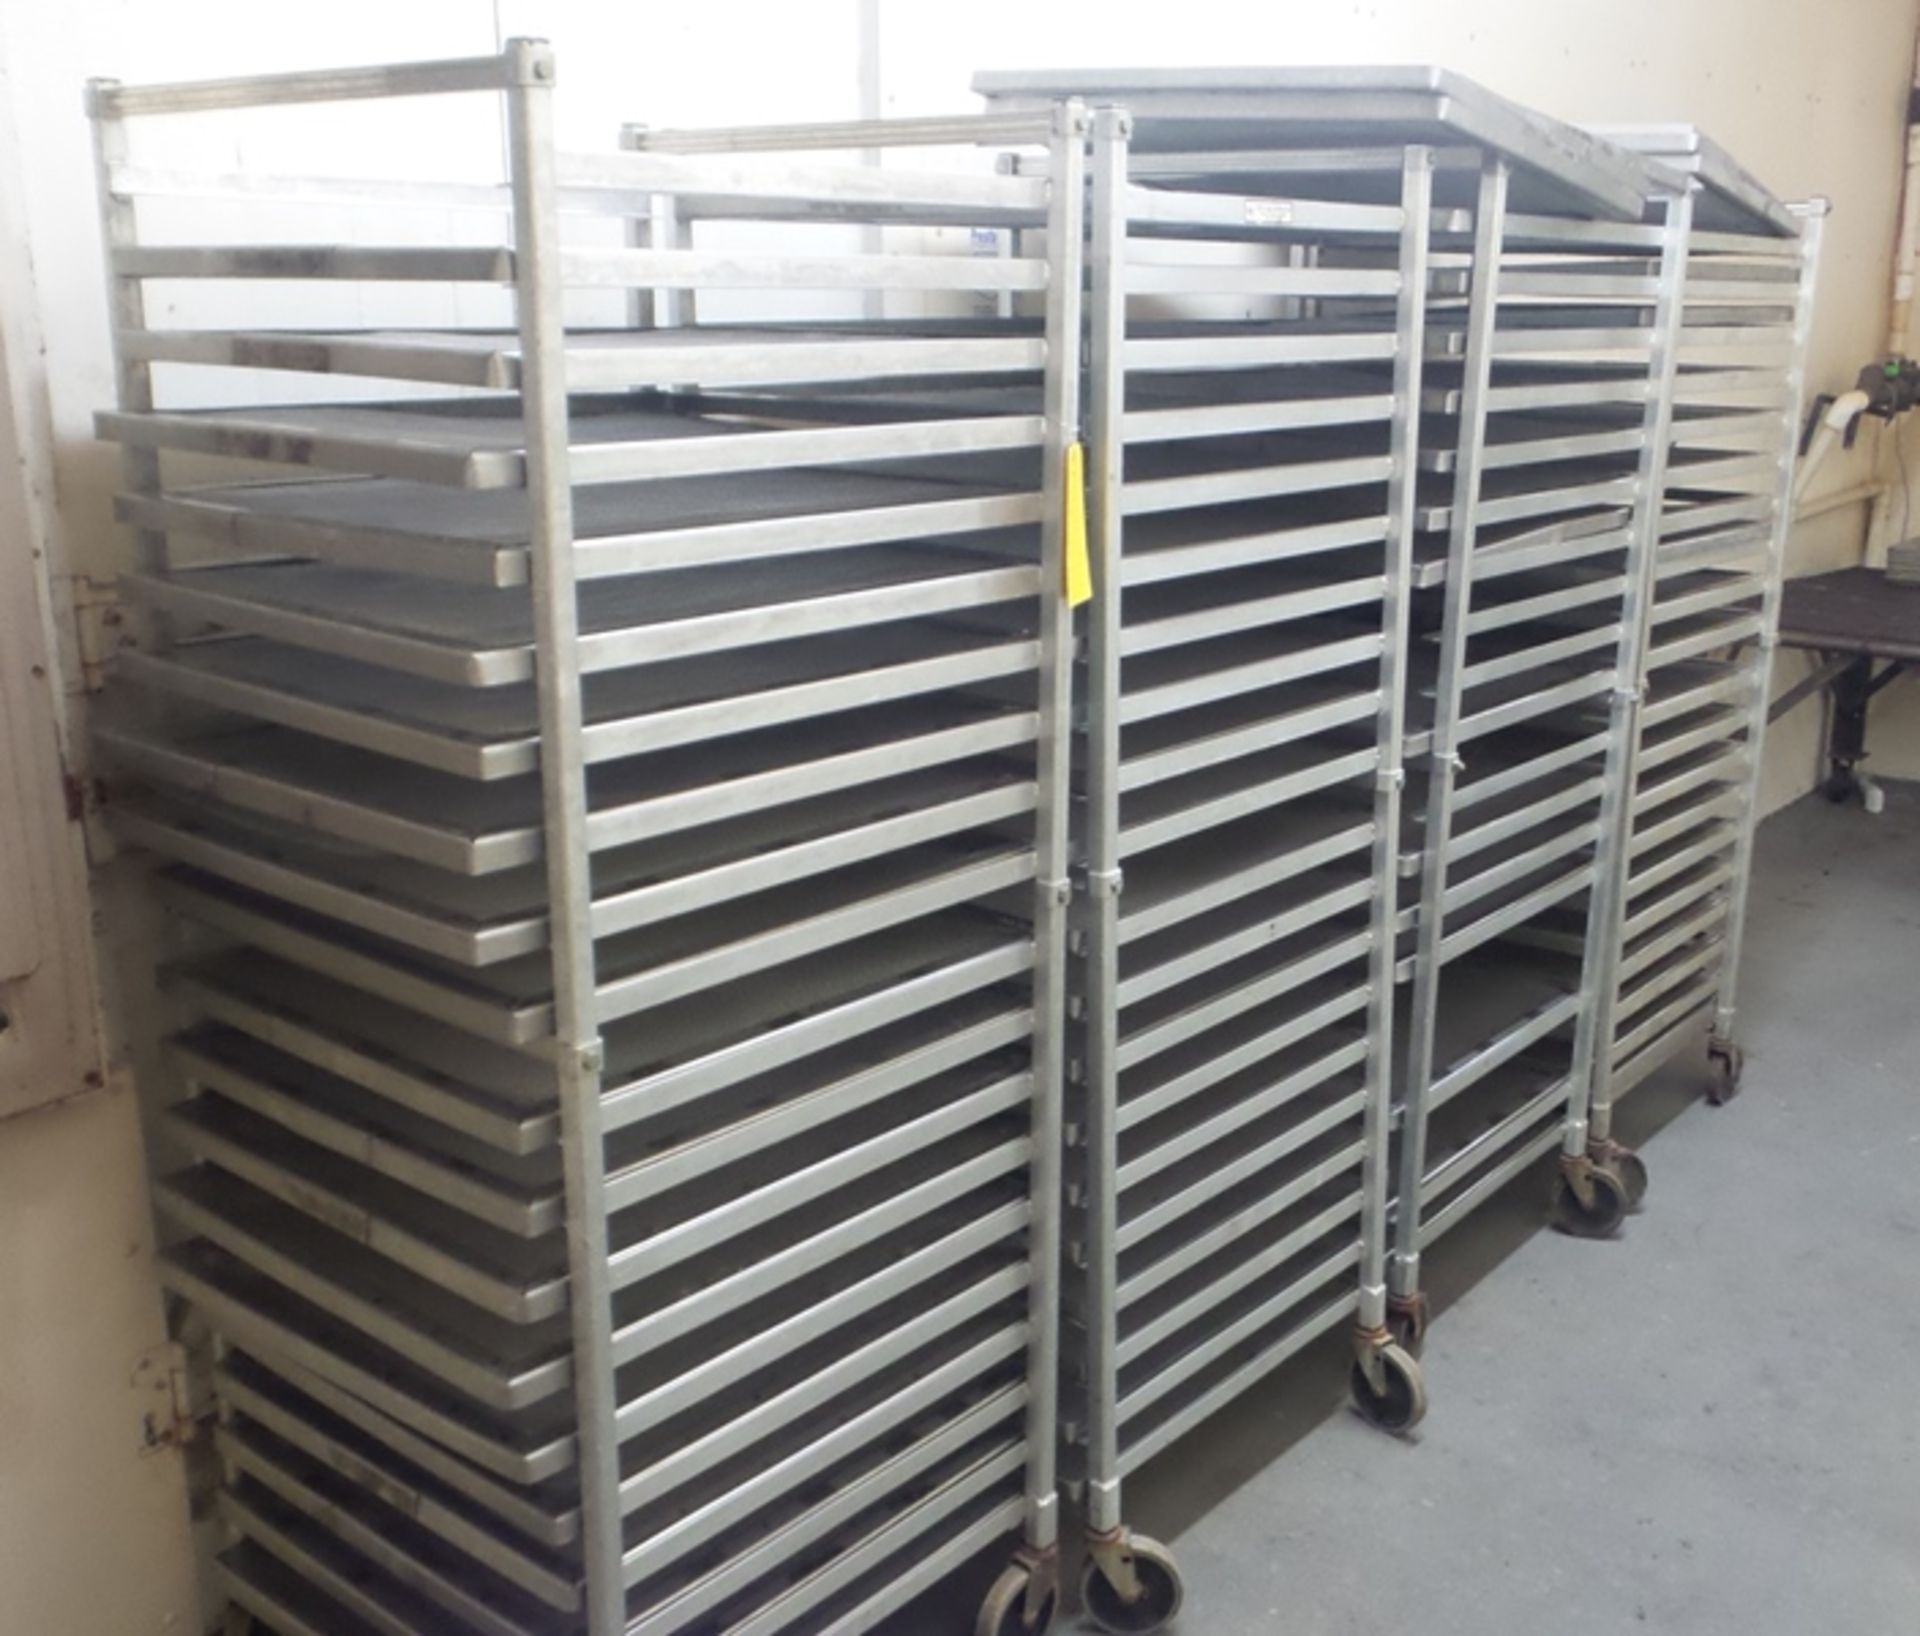 Aluminum Freezer Carts, 27"x 27" x 69" w/24.5" X 29" stainless steel mesh screens(All Funds Must